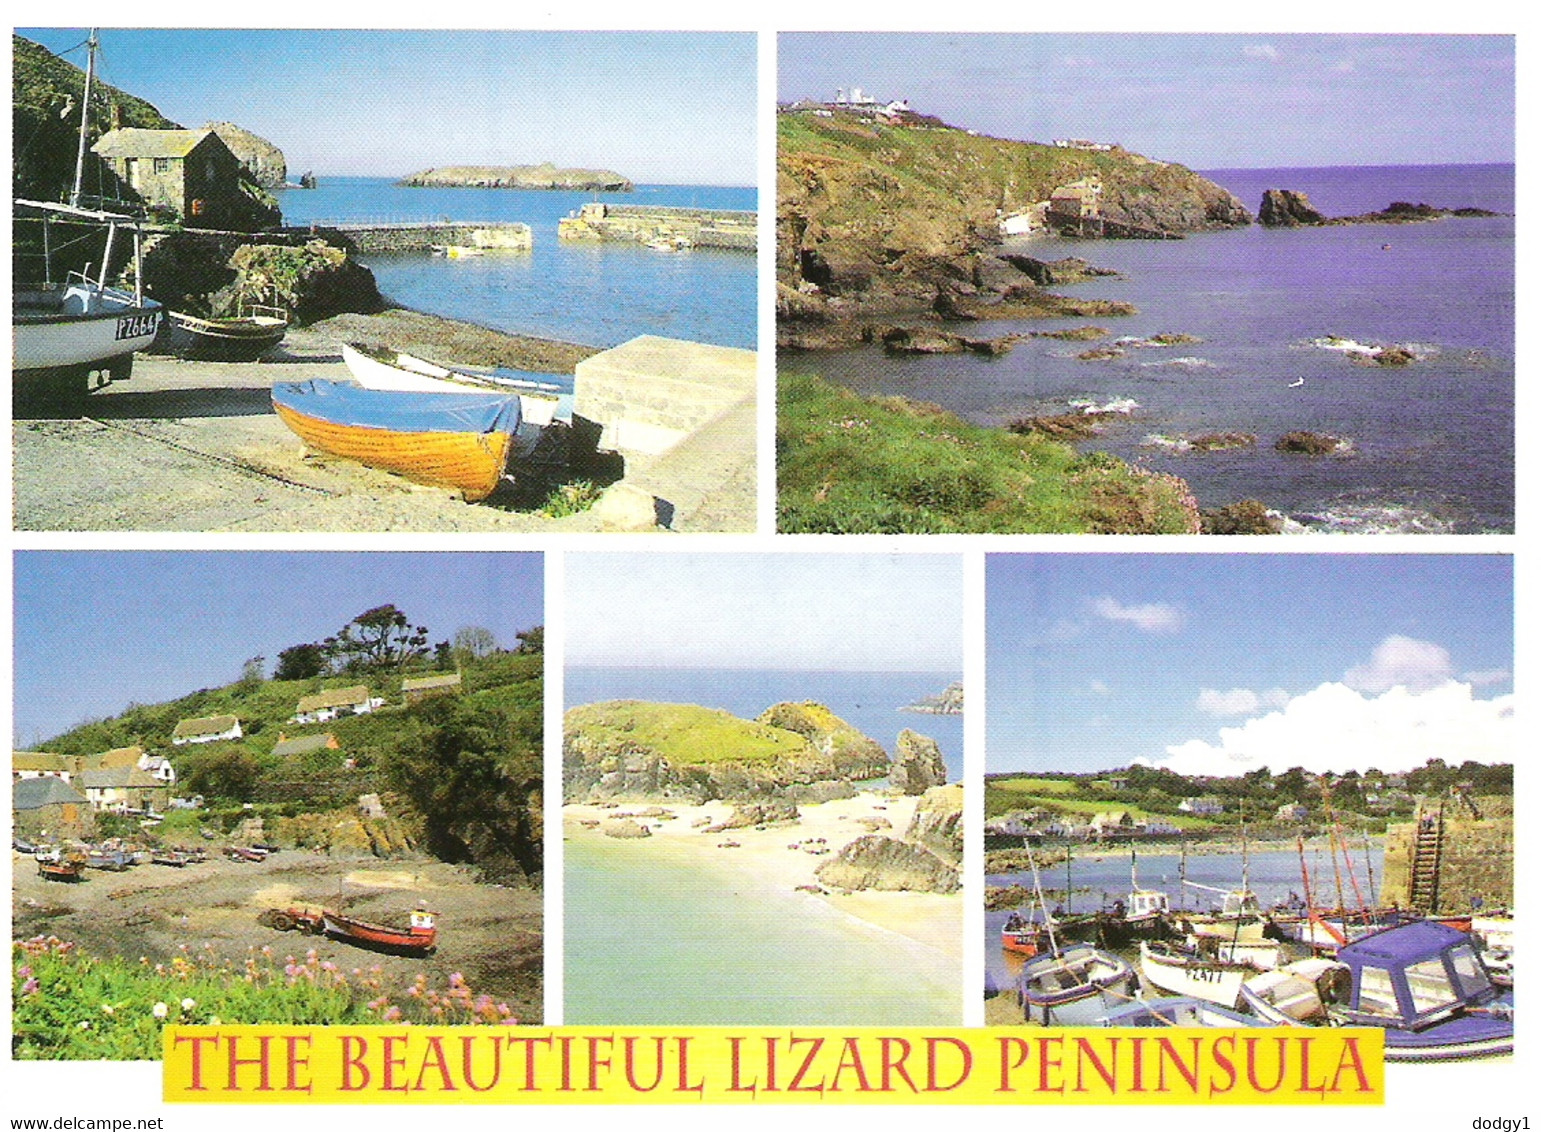 SCENES FROM THE LIZARD PENINSULA, CORNWALL, ENGLAND. USED POSTCARD Gv4 - Land's End